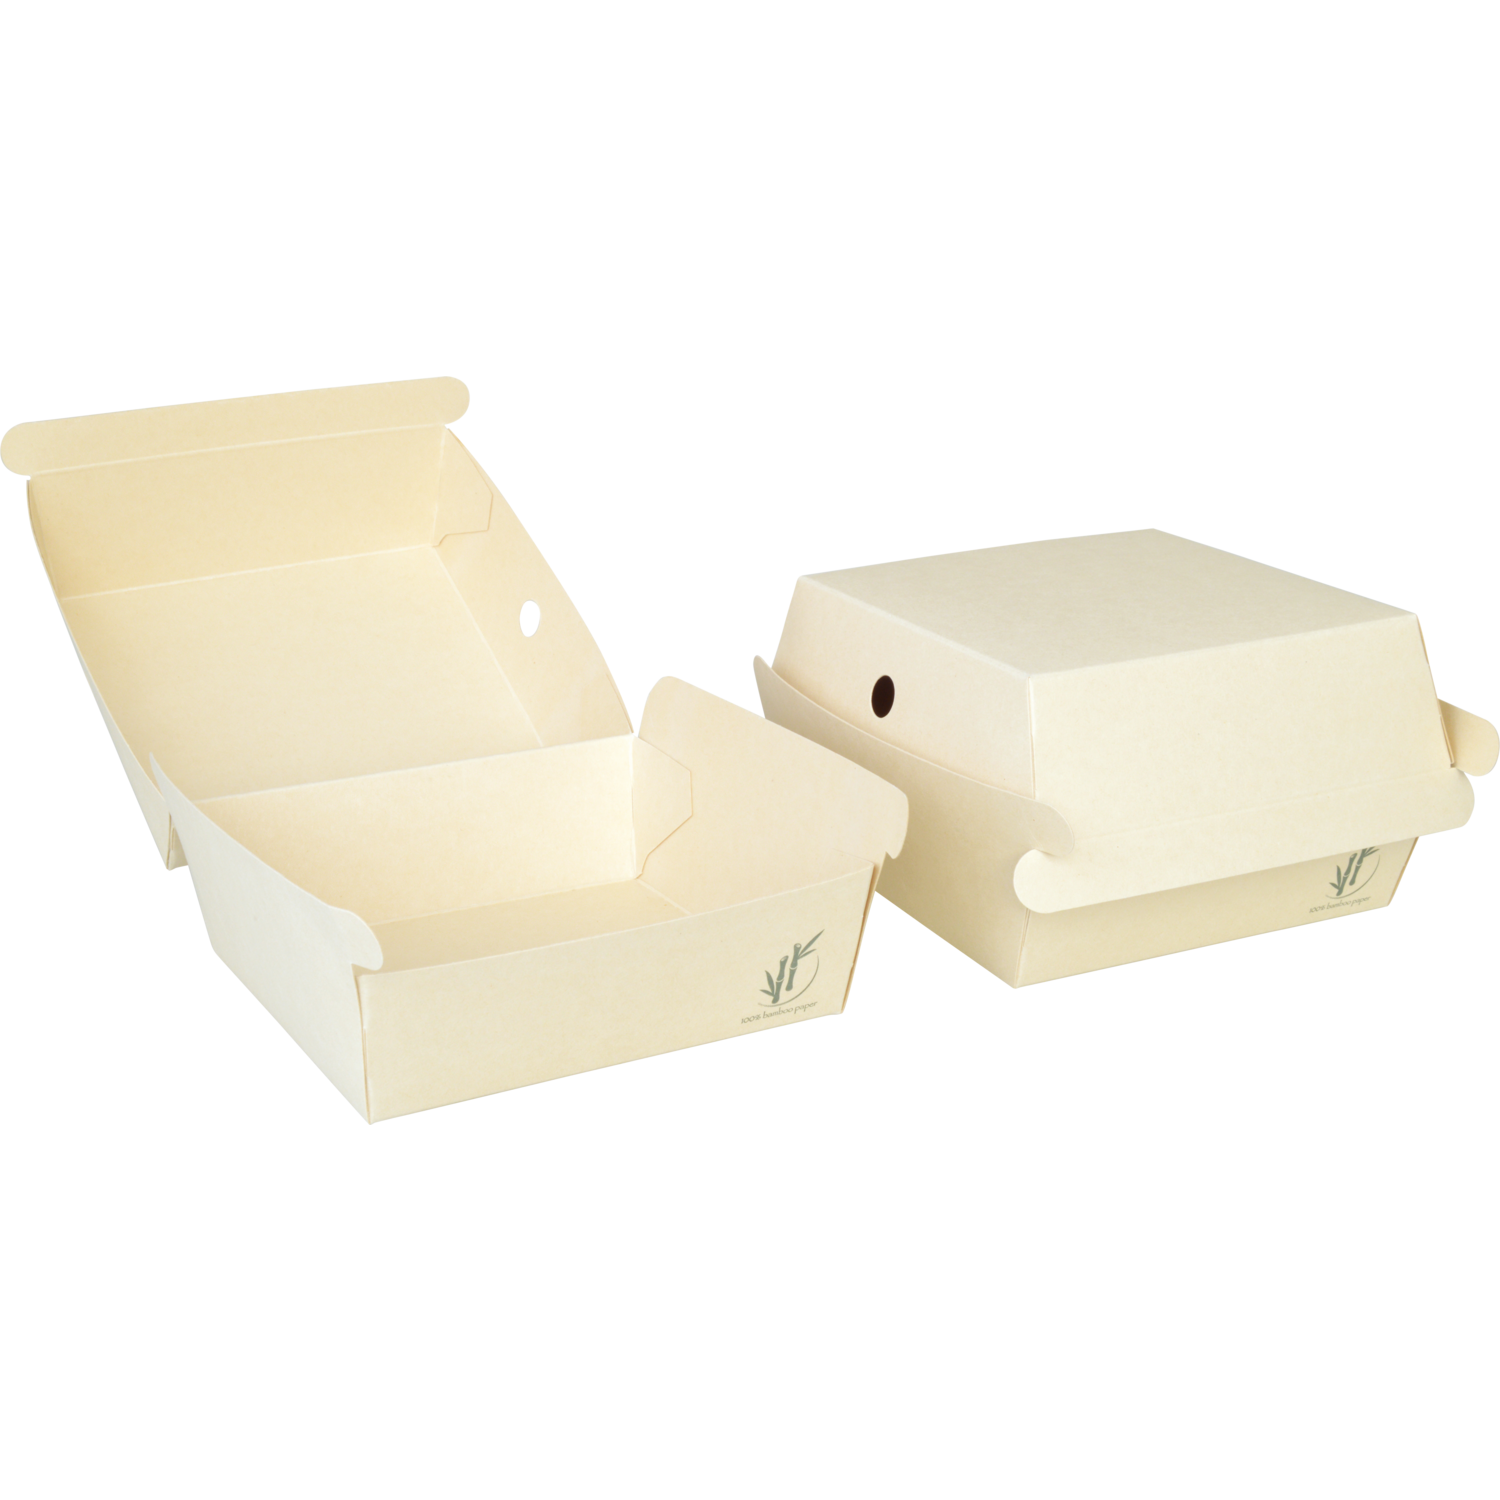 Depa® Container, Paper + PE , hamburger container, 118x115x78mm, natural 1